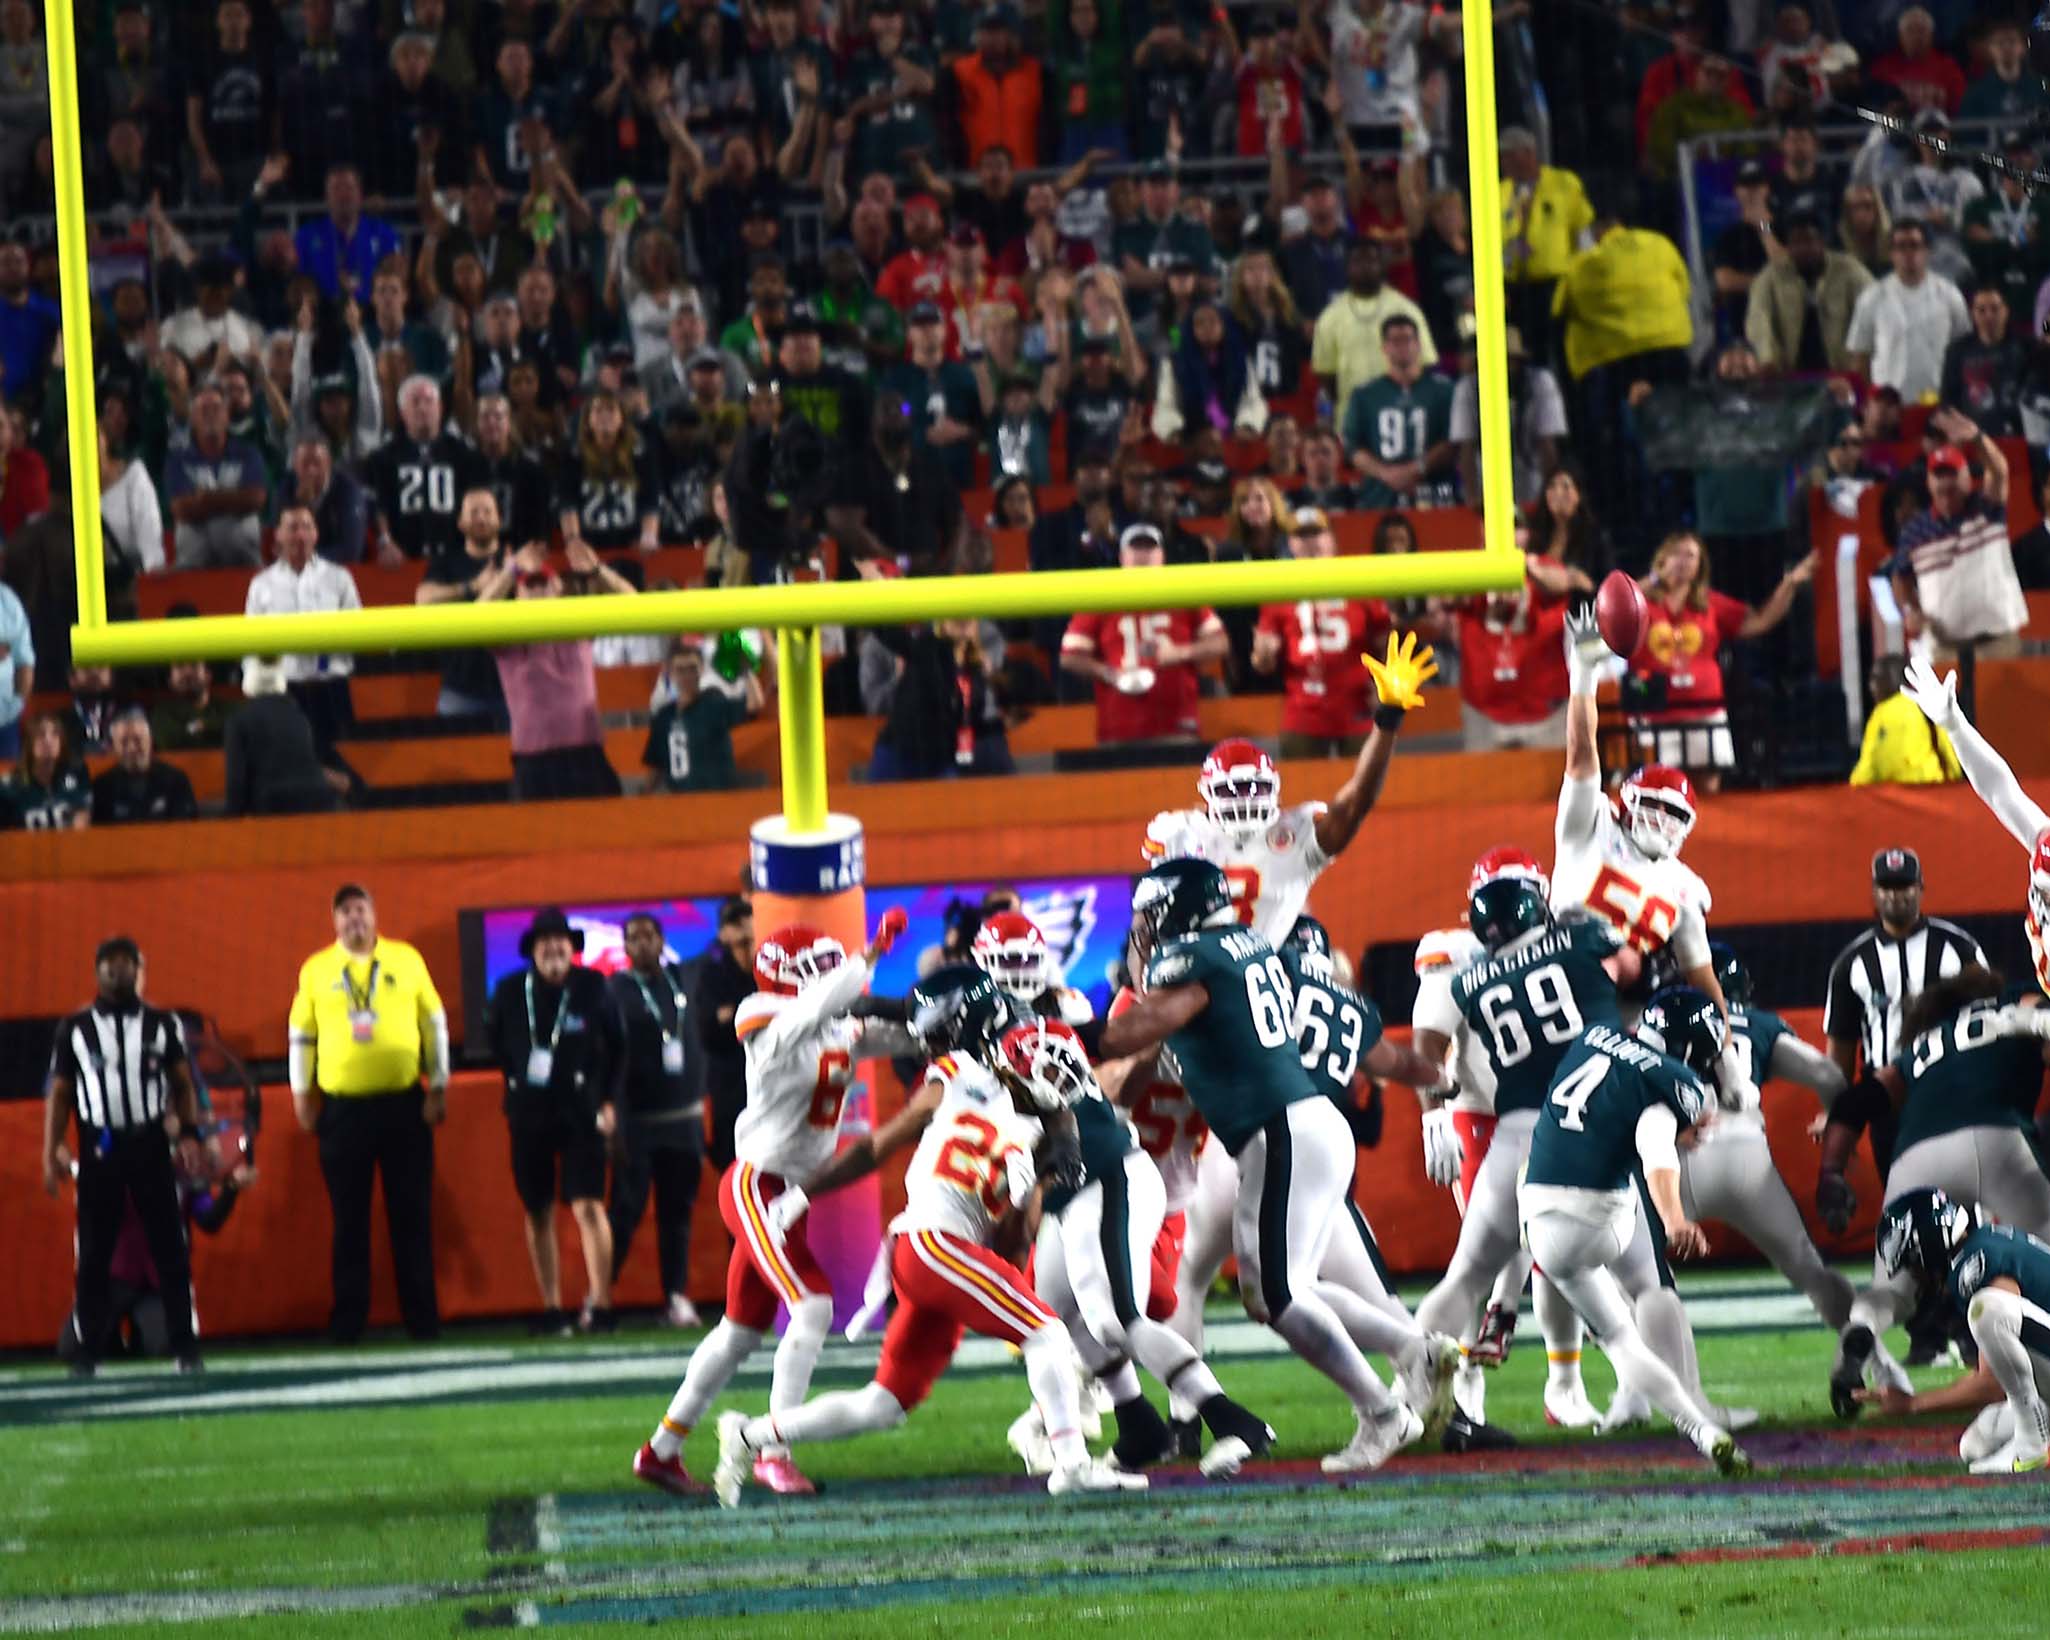 Philadelphia Eagles place kicker, JAKE ELLIOT, kicks a field goal giving the Eagles a 27-21 lead at the end of the third quarter. The Chiefs rallied in the fourth quarter to win 38-35 on a last minute field goal.